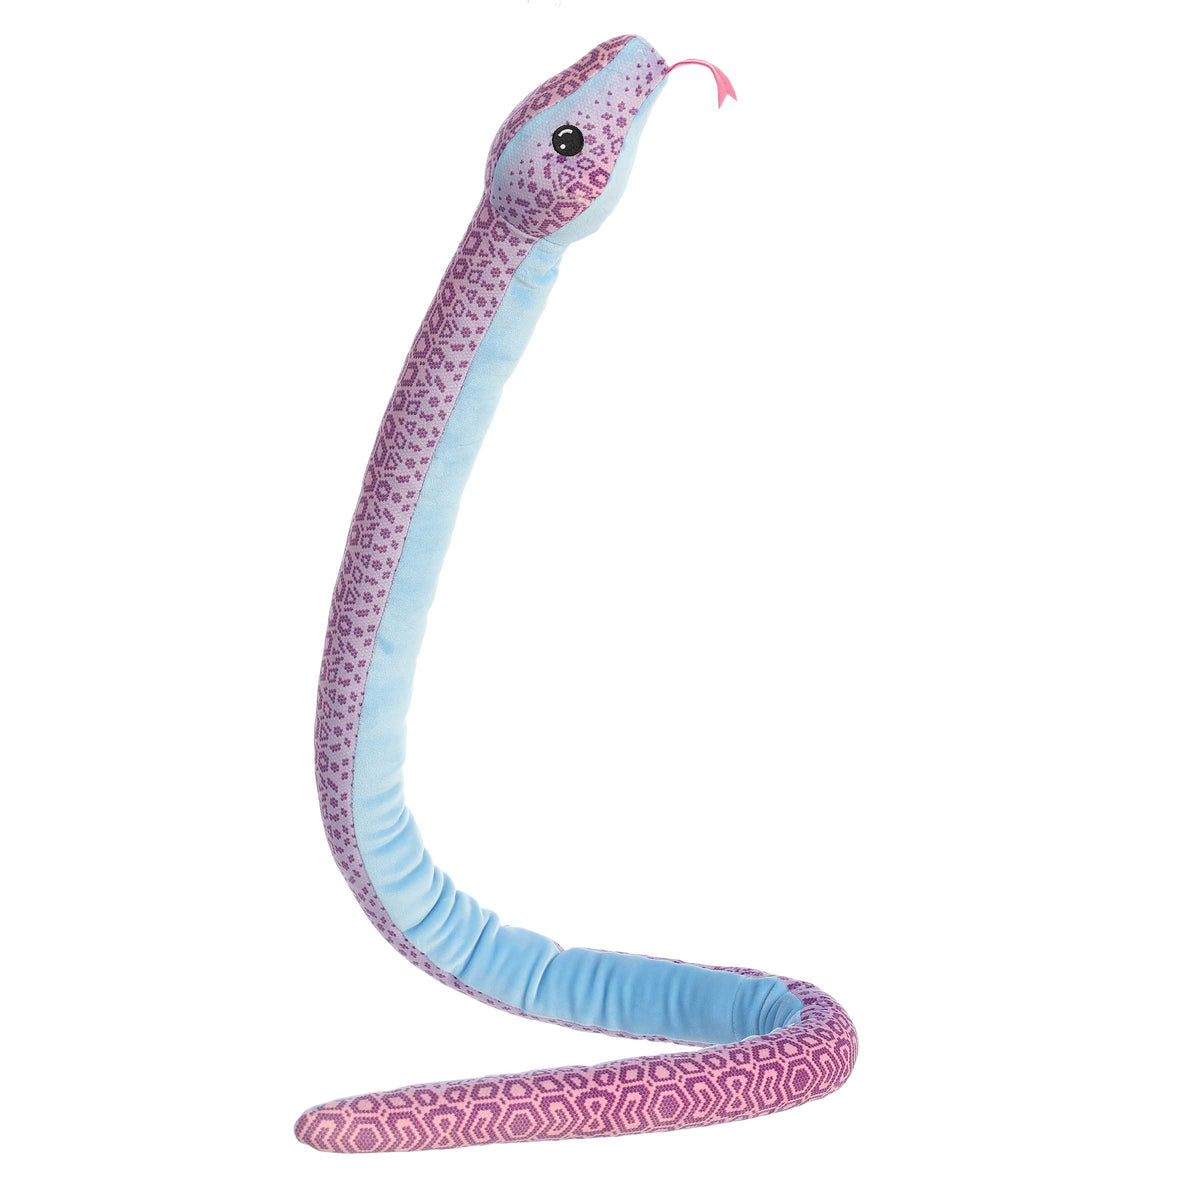 Colorful pastel tie-dye snake plush with a squishy feel, featuring a blue underside and vibrant purple scales.